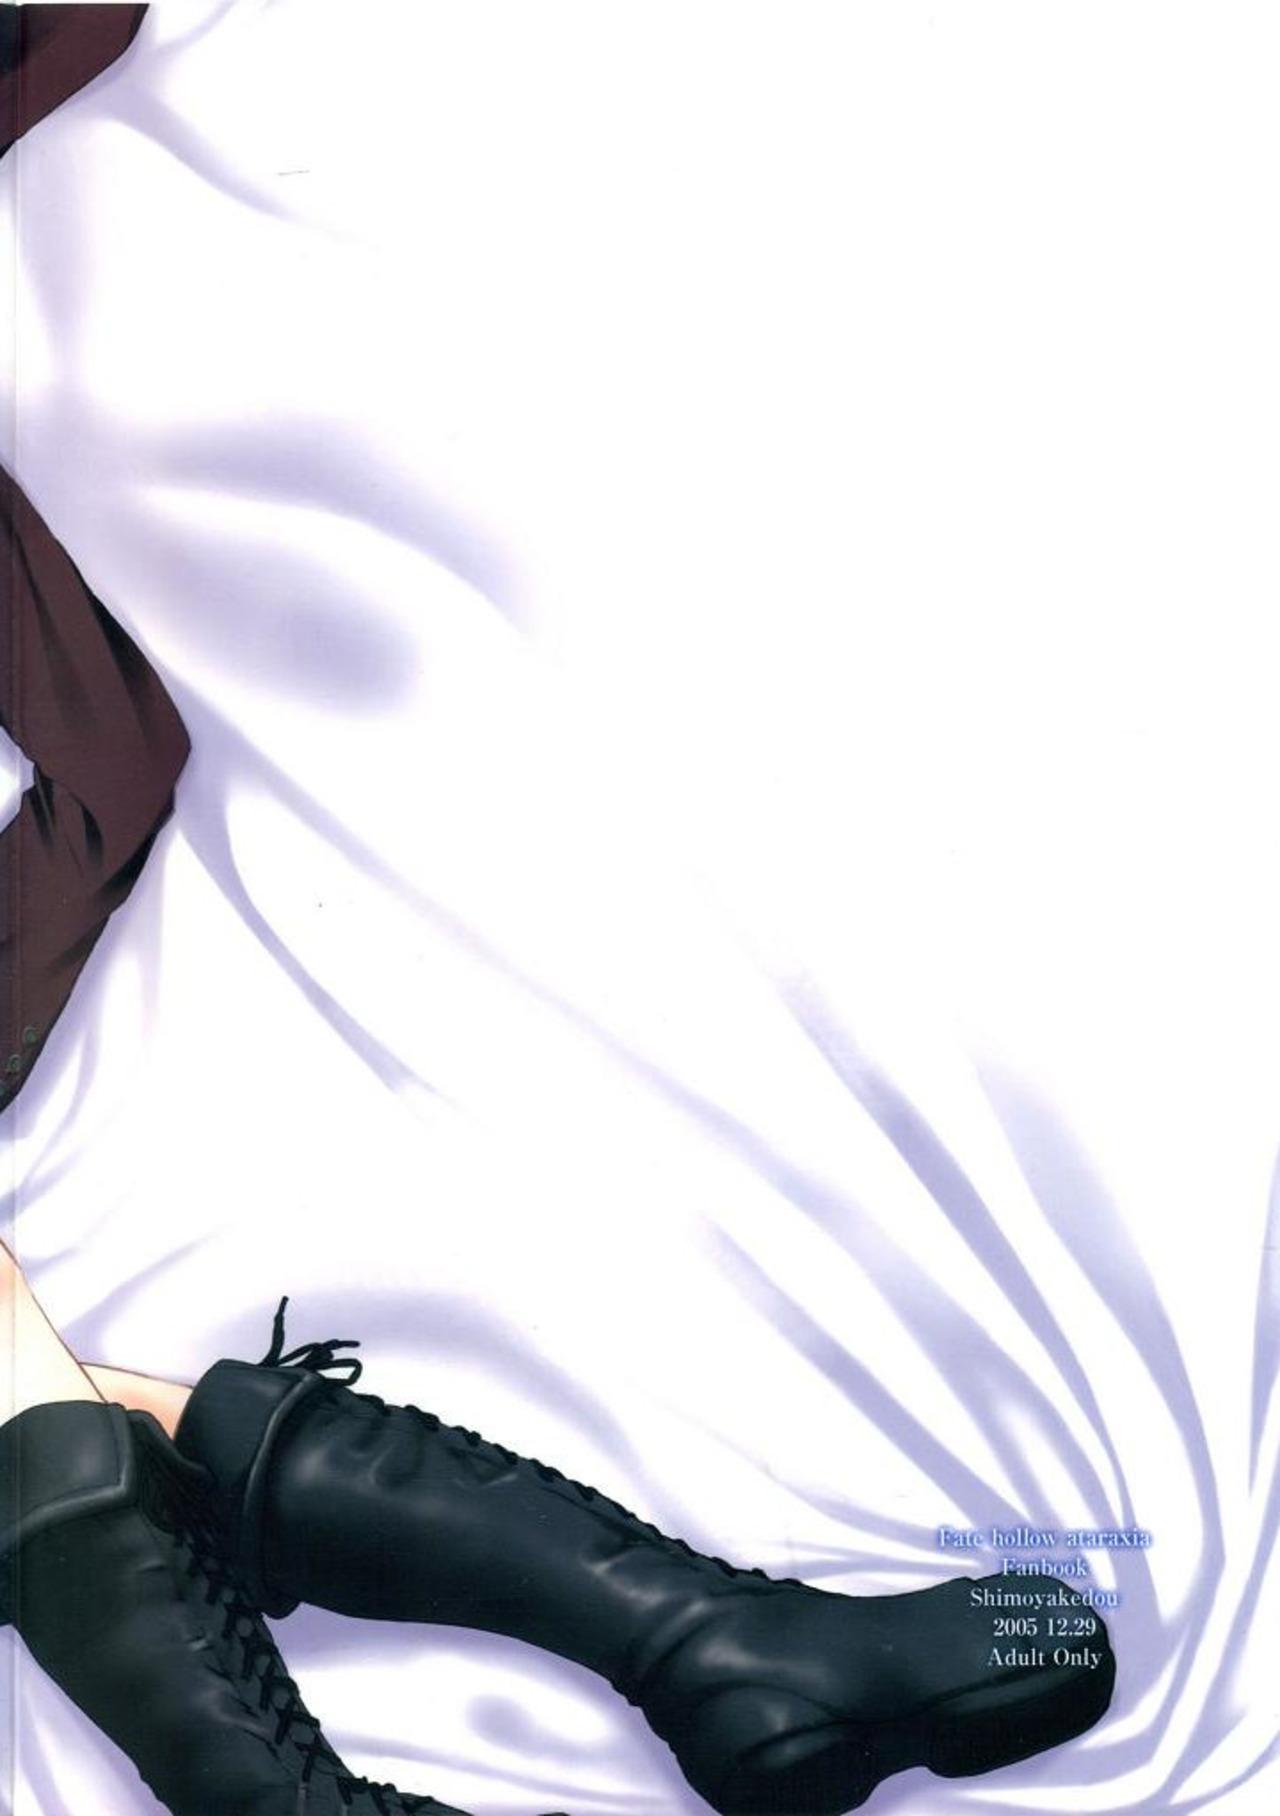 Edging Narcolepsy - Fate hollow ataraxia Anal Sex - Picture 2